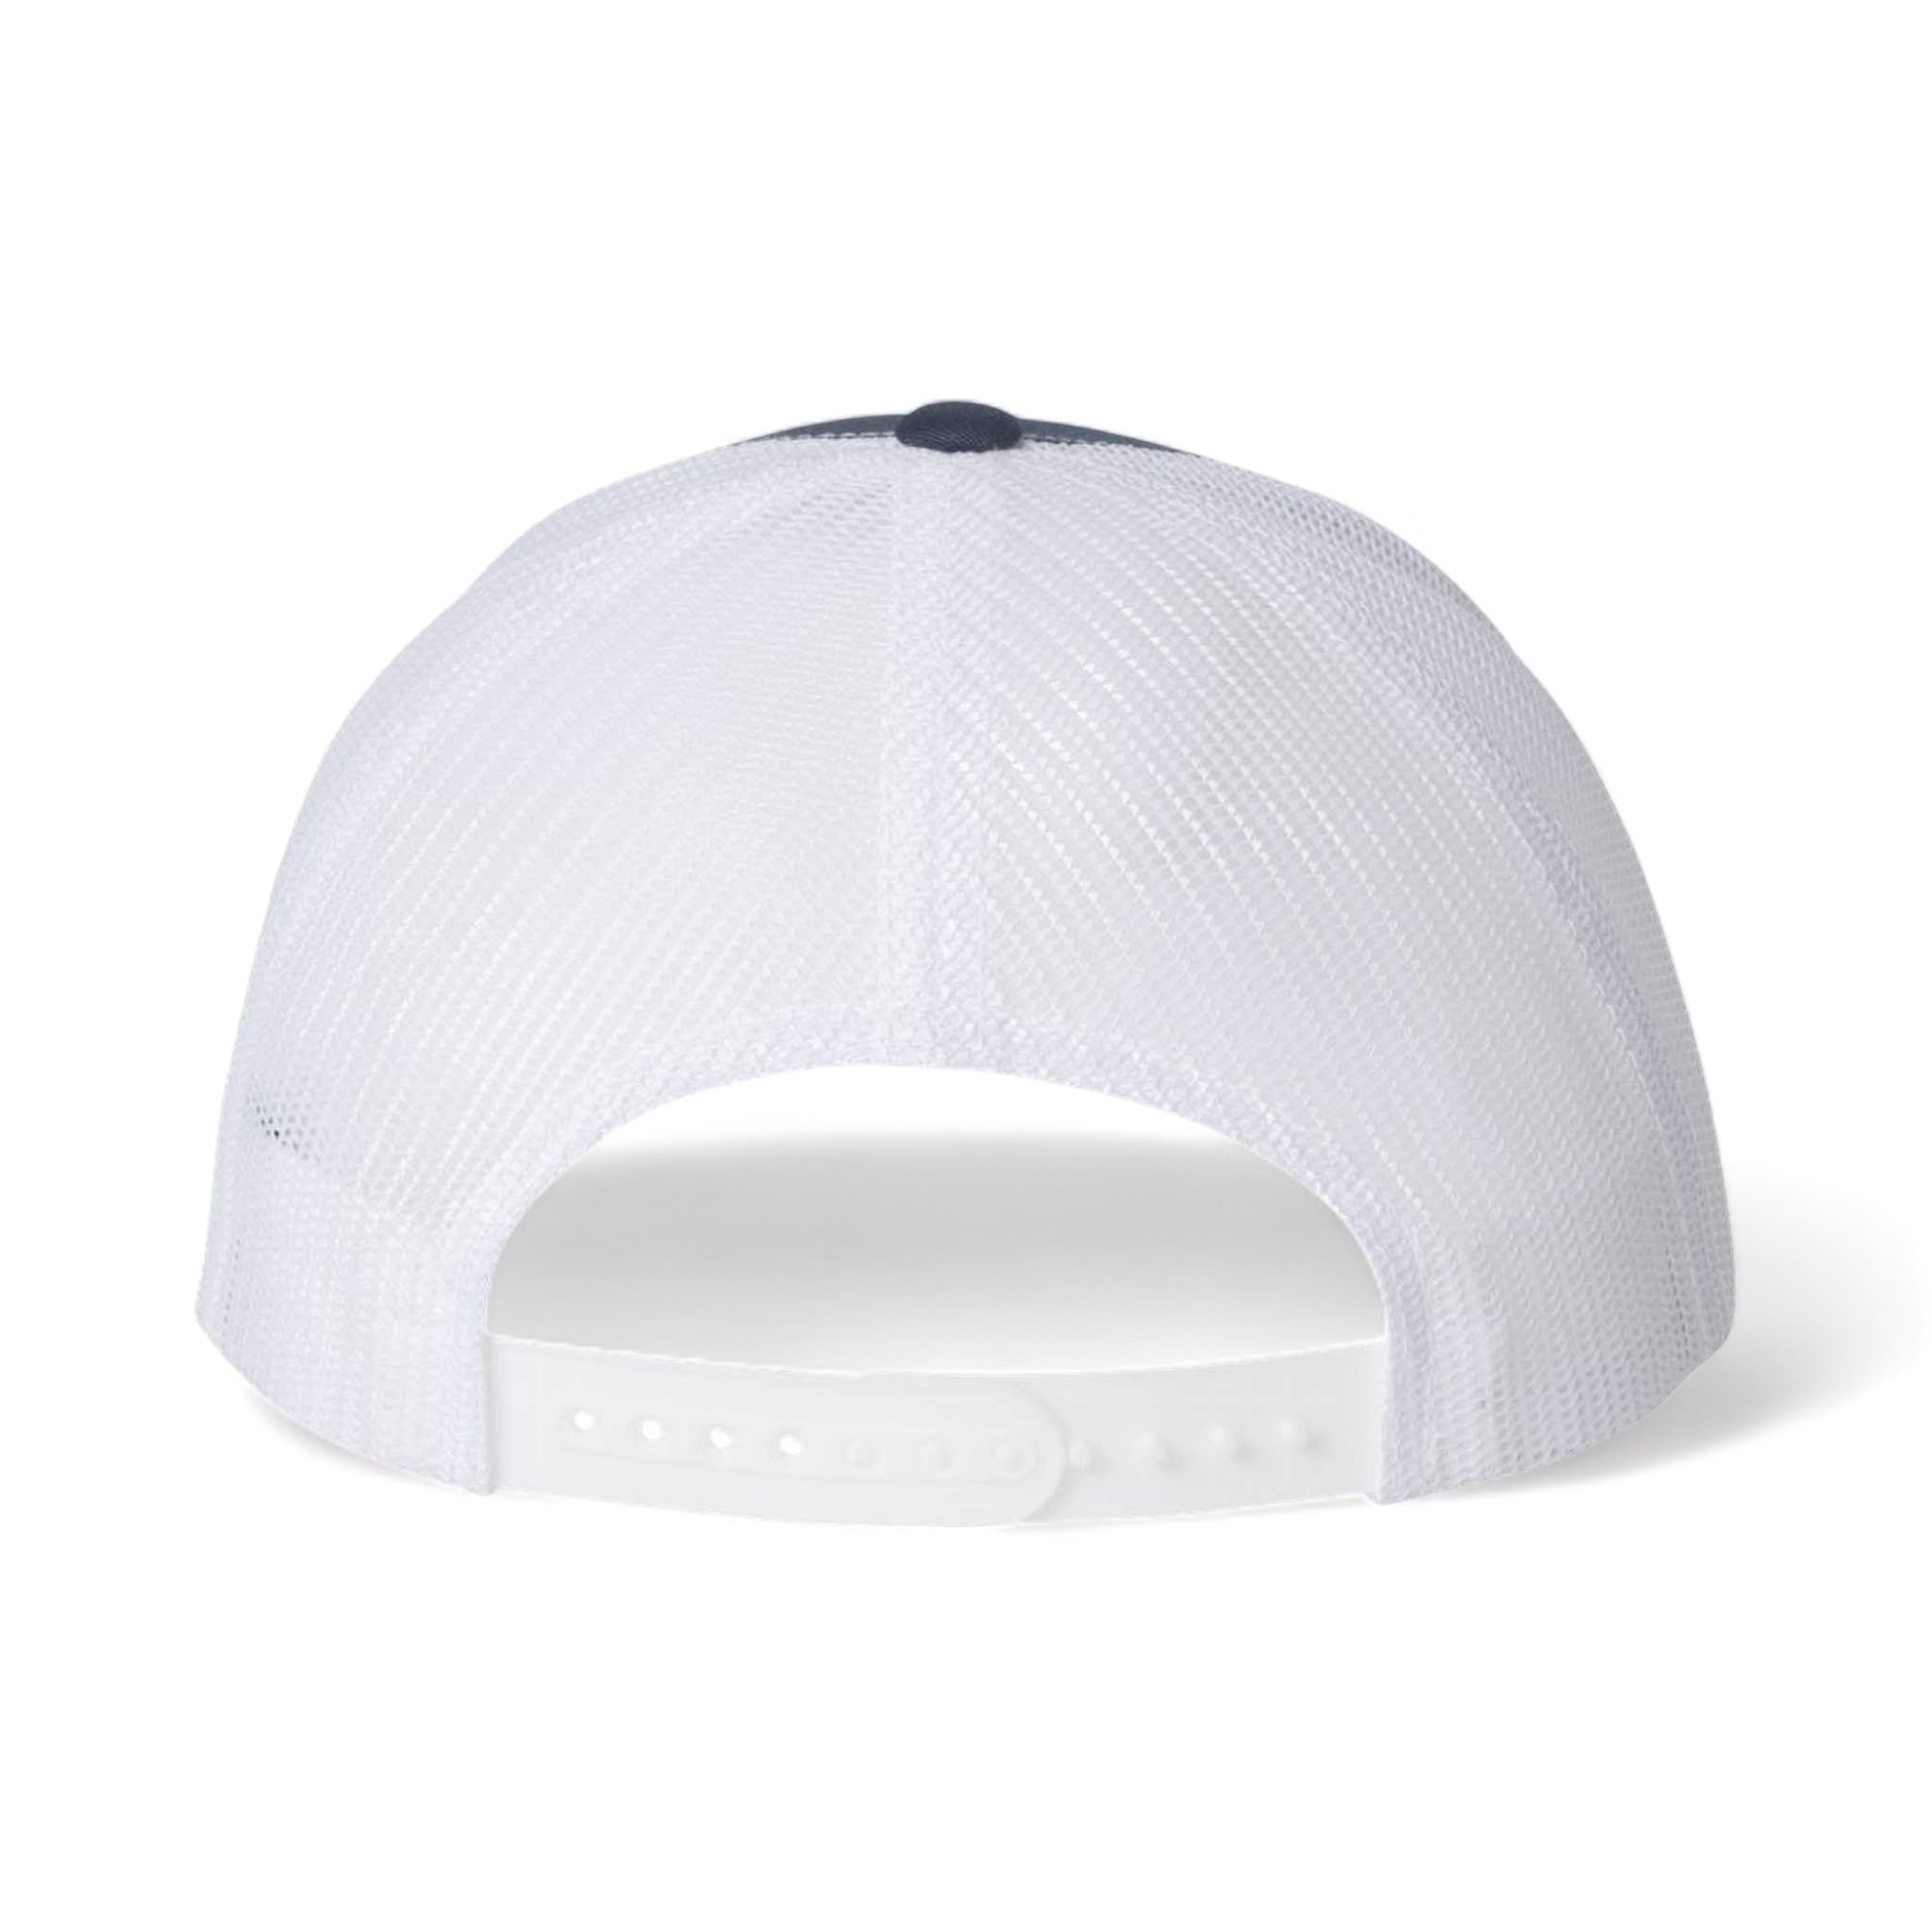 Back view of YP Classics 6606 custom hat in navy and white